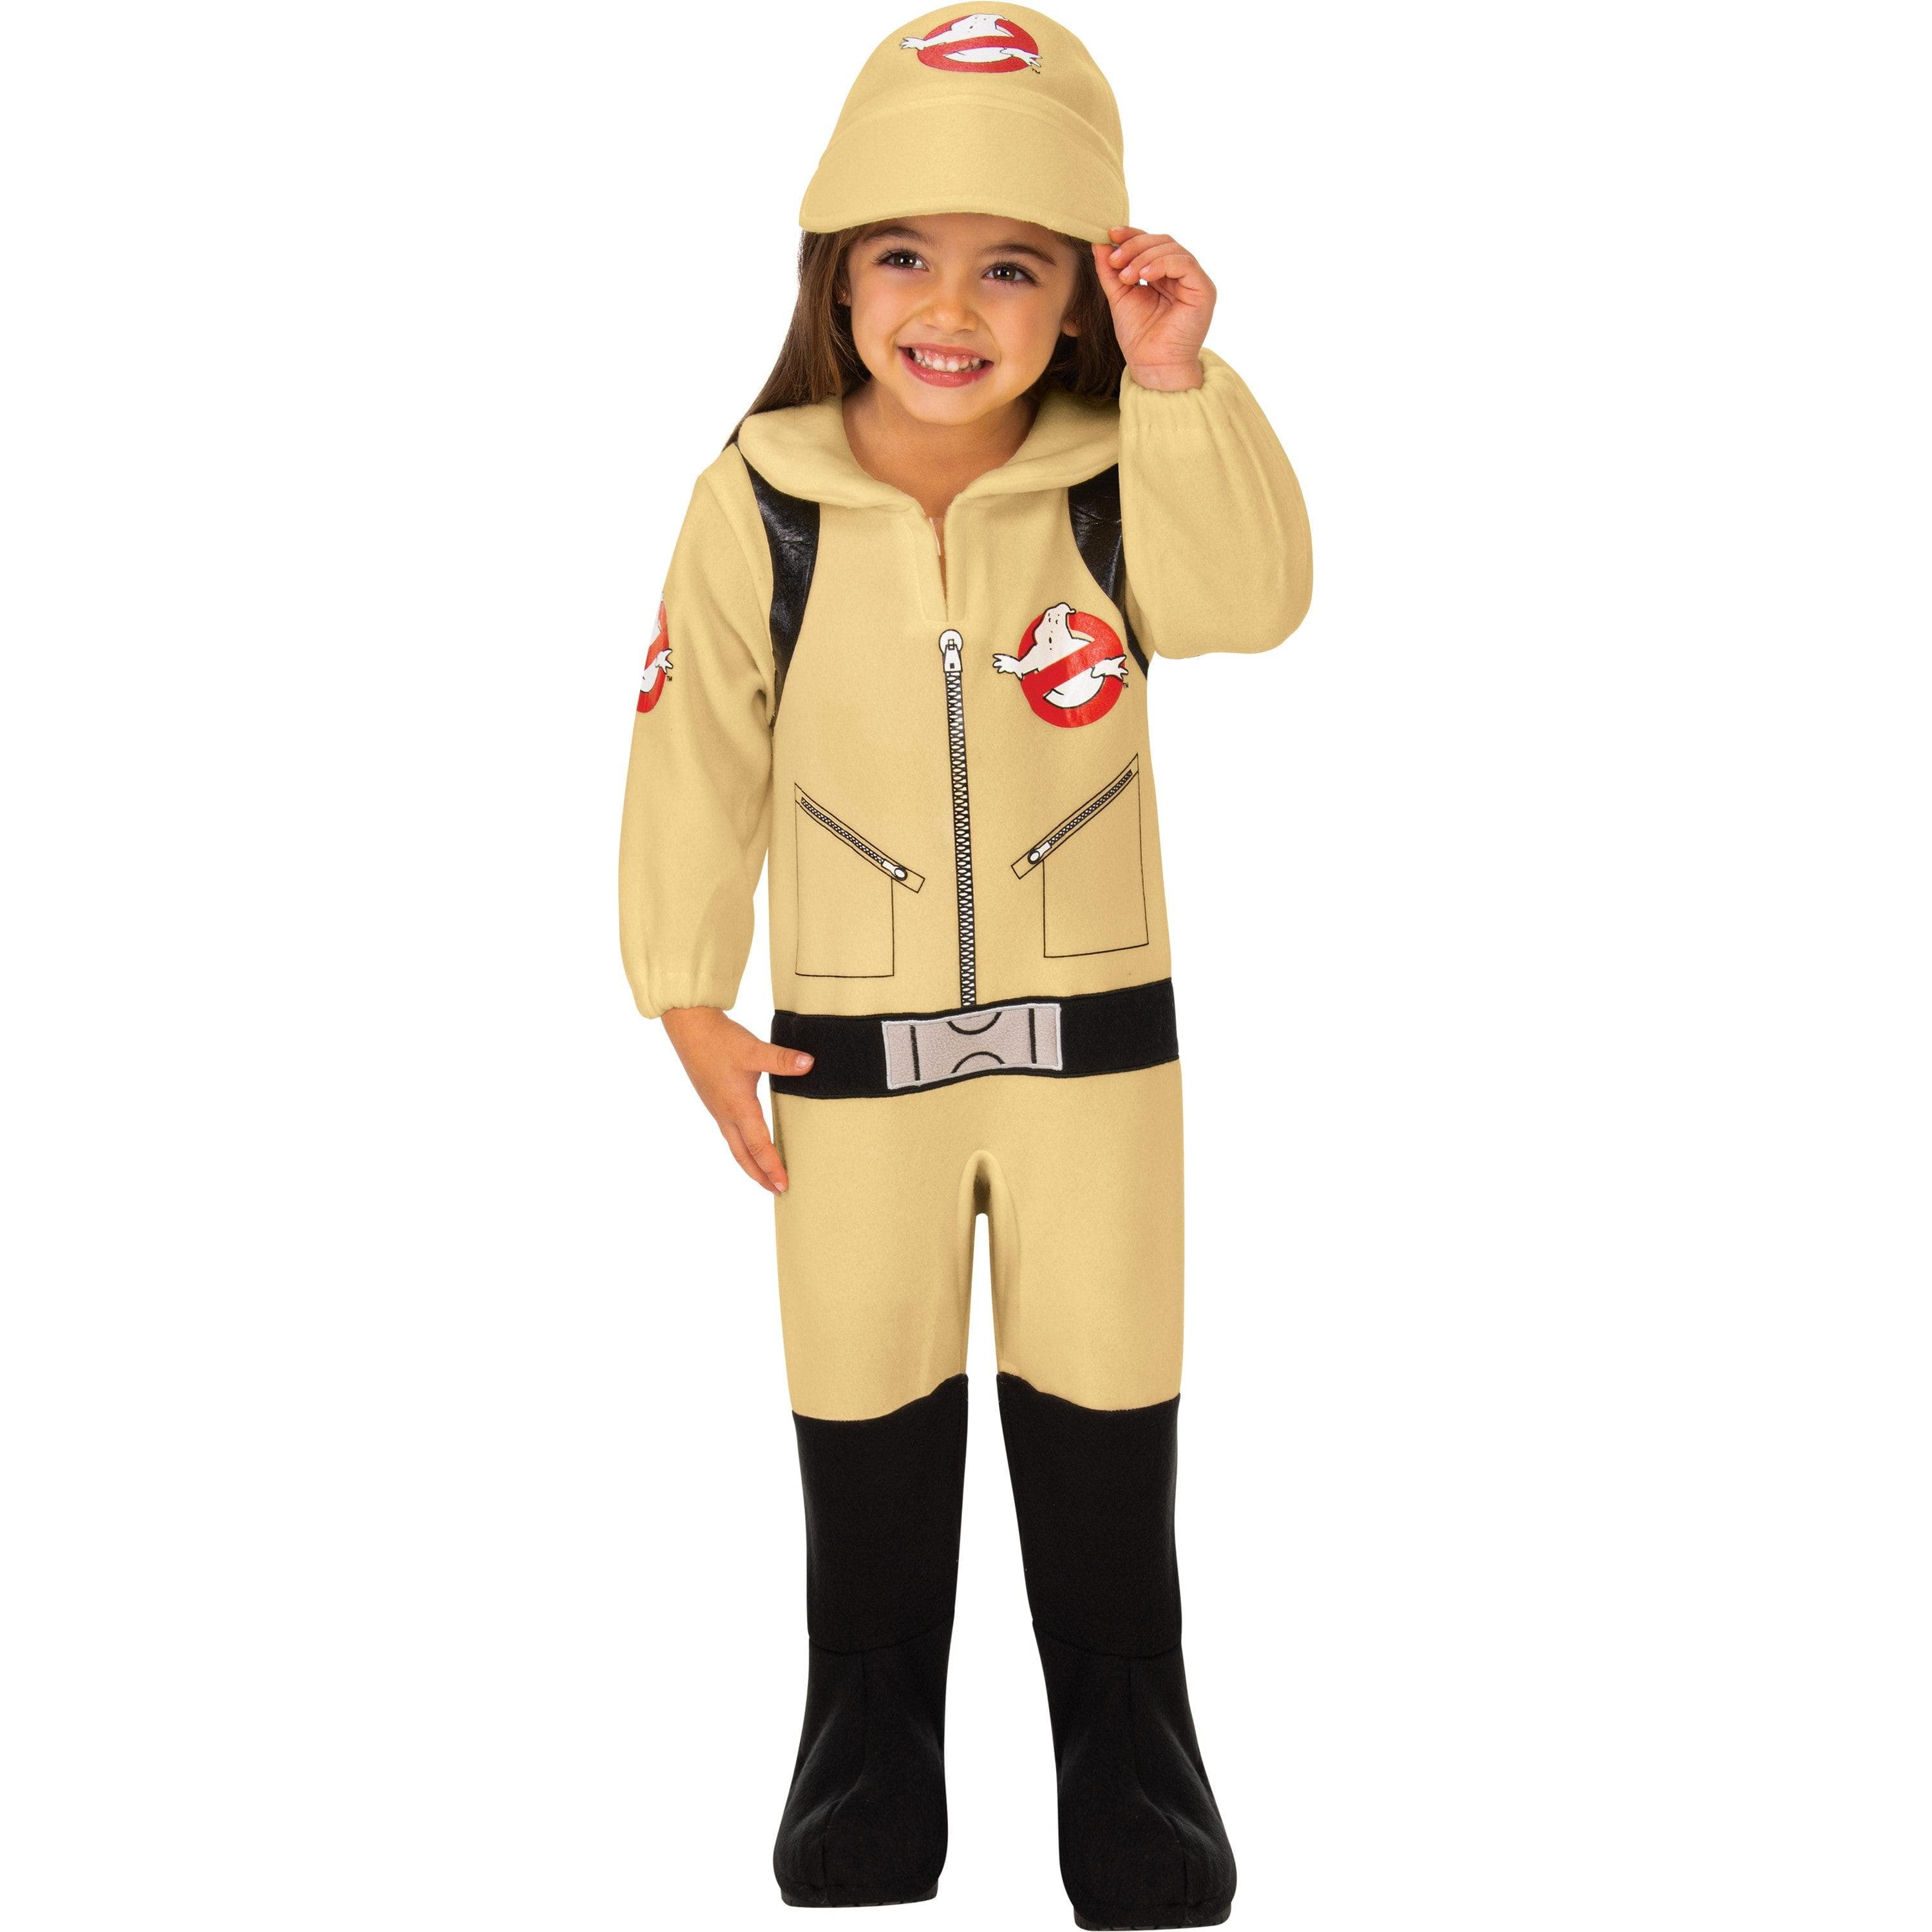 Ghostbusters Jumpsuit and Hat for Toddlers - costumes.com